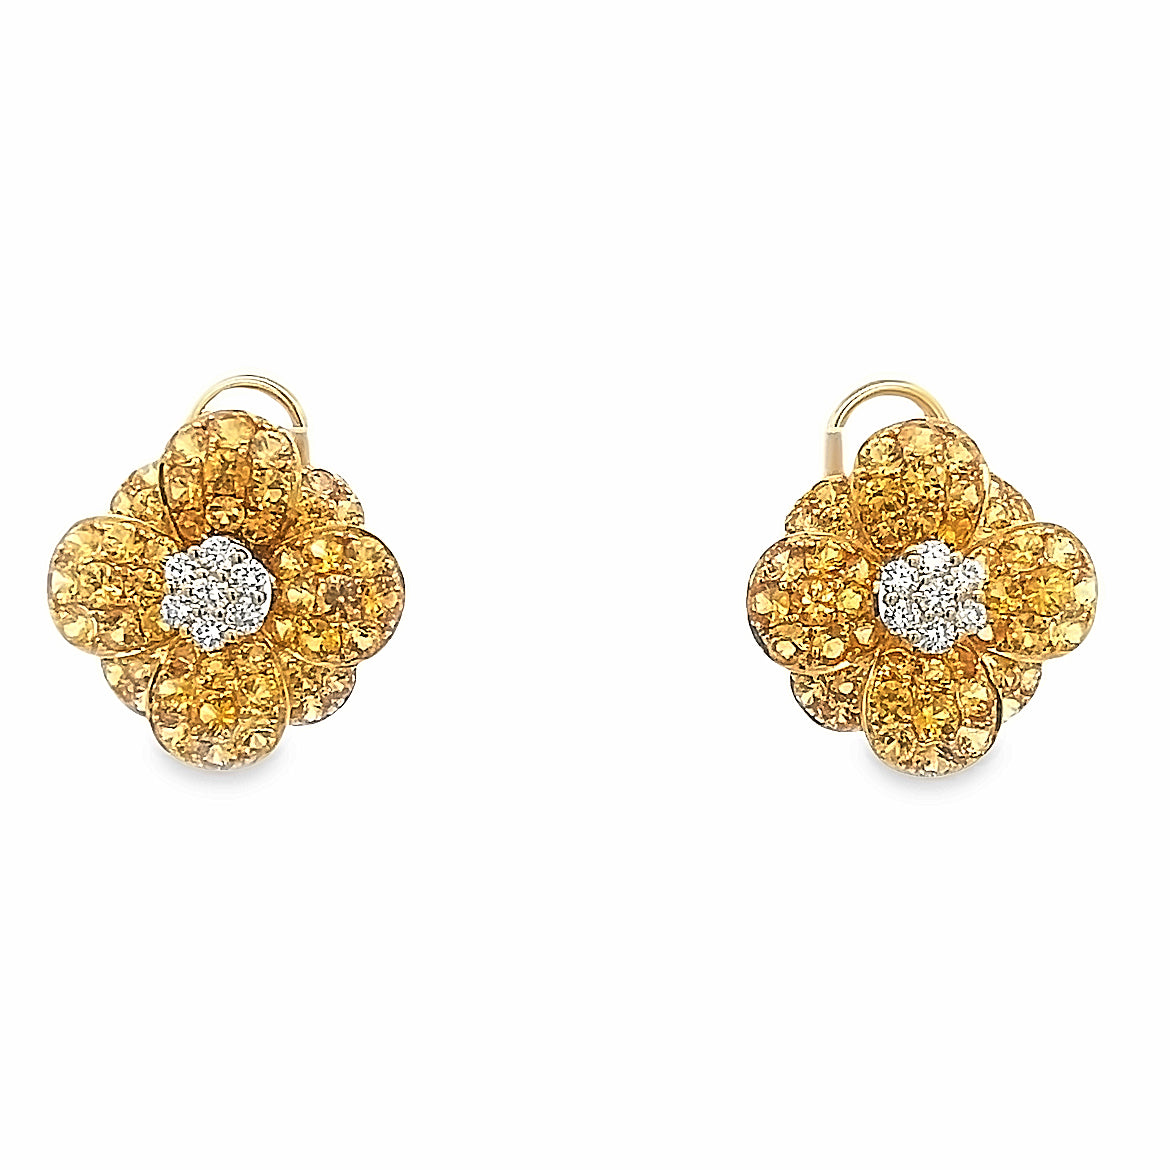 18K GOLD FLOWER EARRINGS WITH YELLOW SAPPHIRE